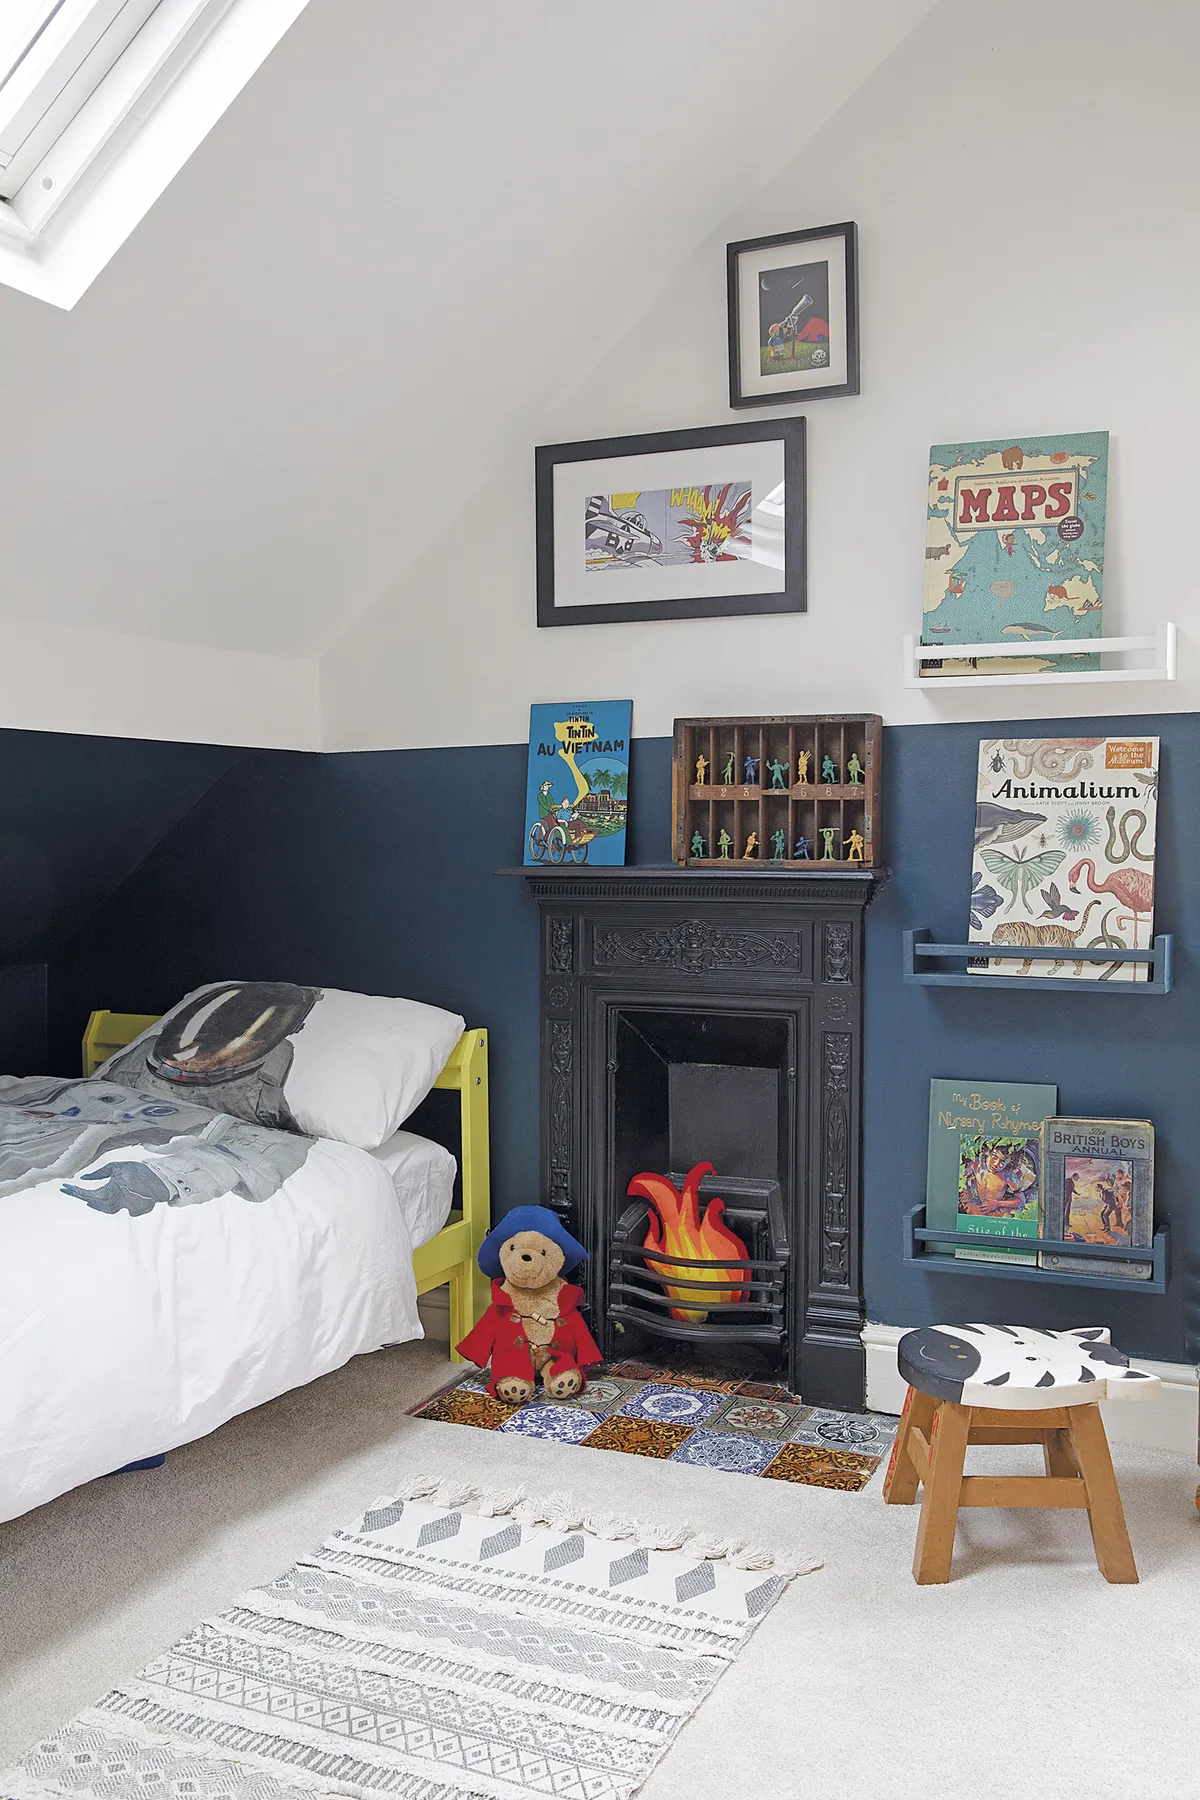 Sam turned IKEA spice racks into bookshelves and painted the bed frame in Yellowcake by Farrow & Ball. ’The printer’s tray was bought at a vintage market,’ says Sam. ‘It’s great for displaying Barnaby’s toy soldiers’